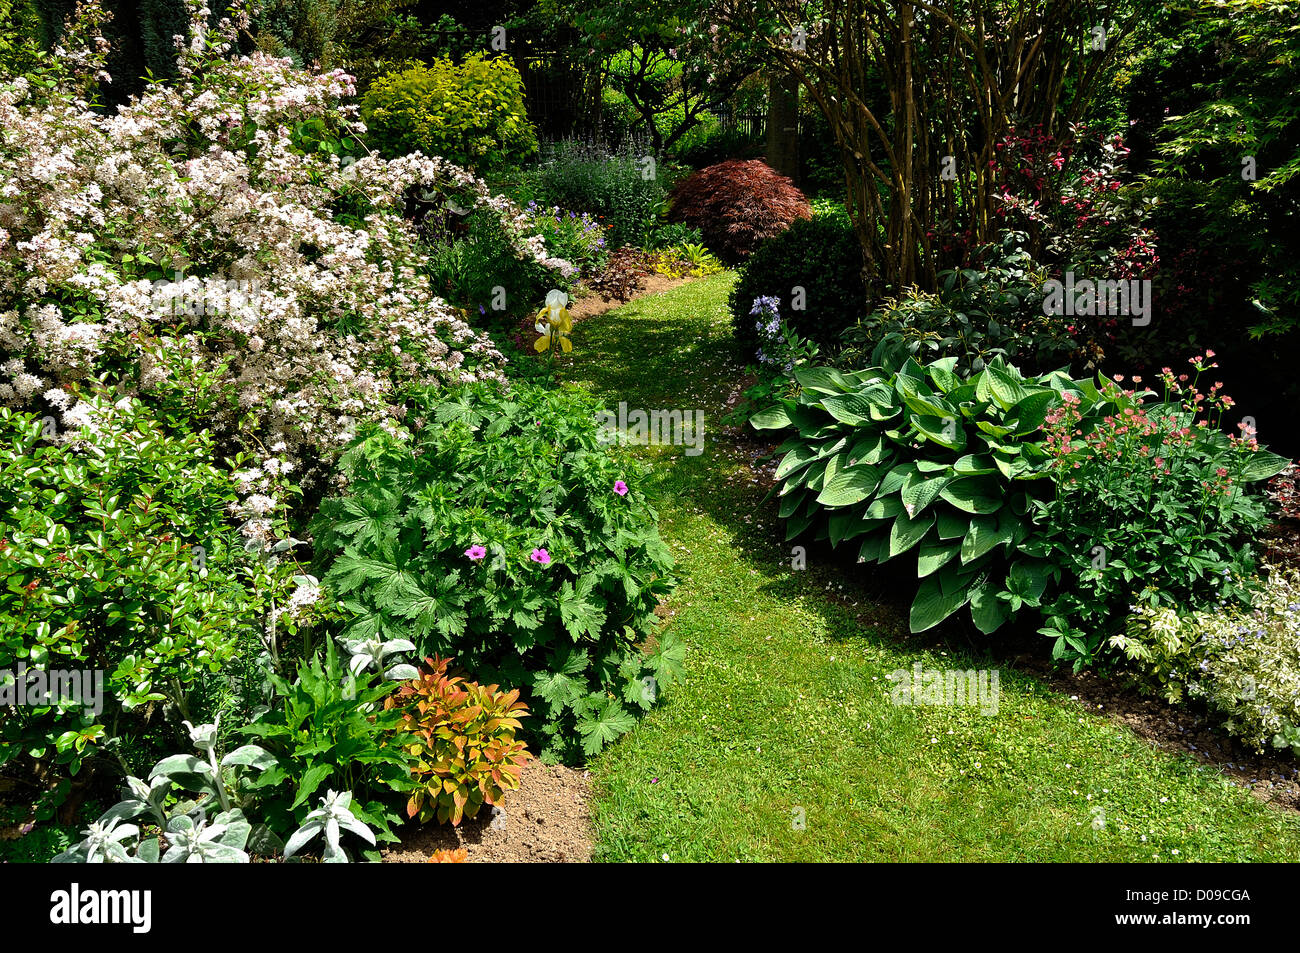 Pleasure garden, path of the garden edged by bushes and various plants (Hosta, ...). Stock Photo